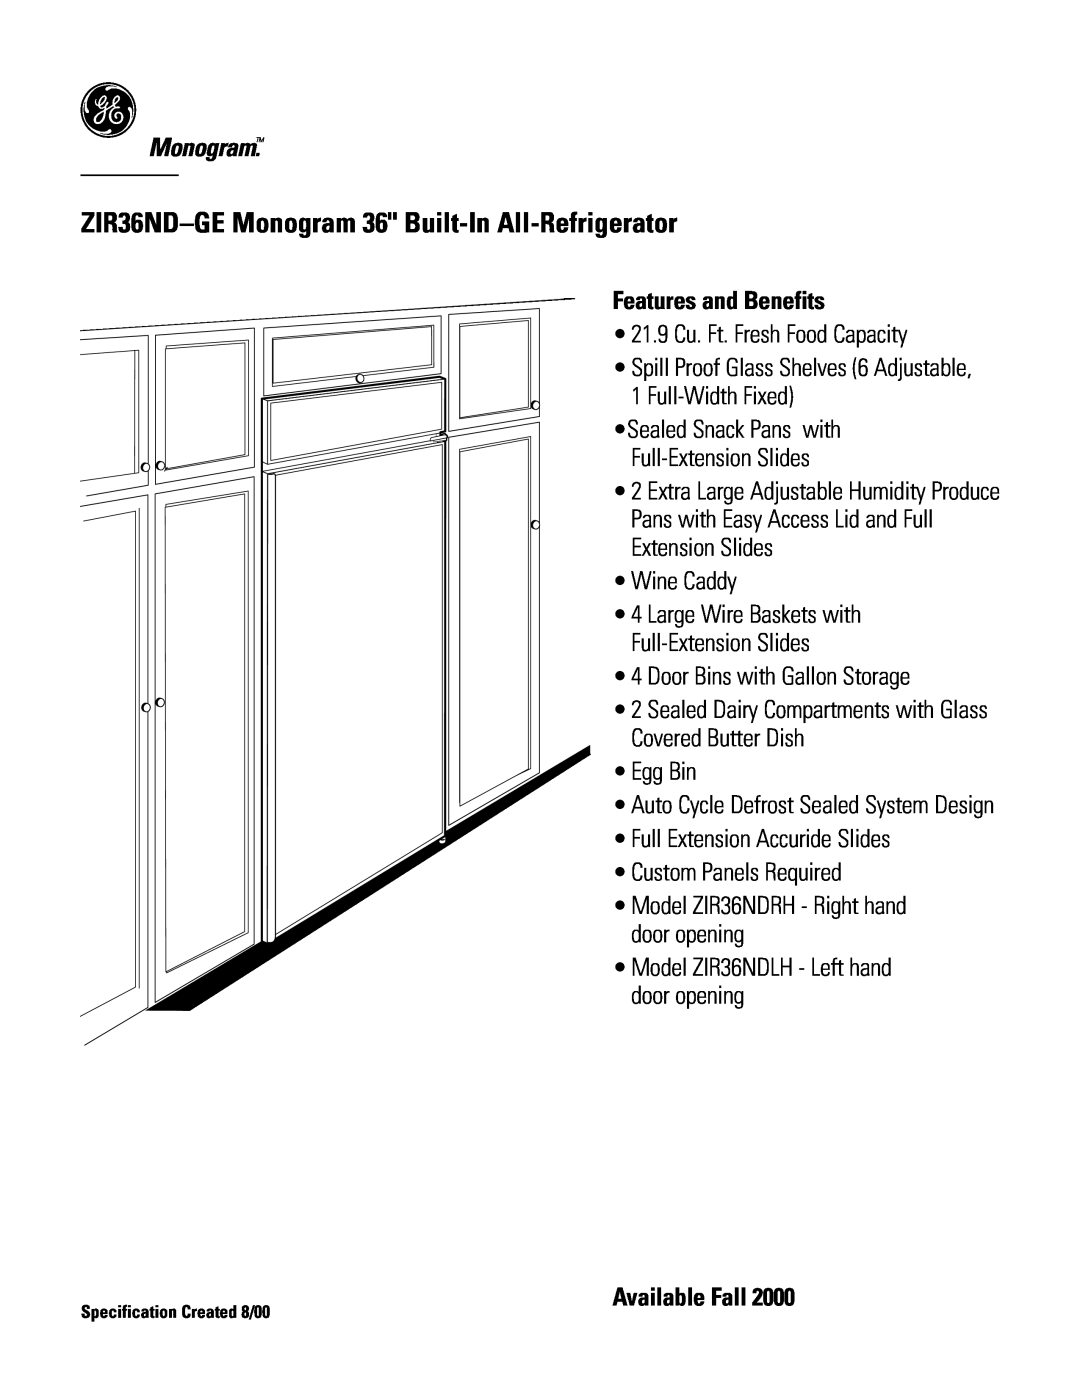 GE Monogram ZIR36NDGE dimensions ZIR36ND-GEMonogram 36 Built-In All-Refrigerator, Features and Benefits, Available Fall 